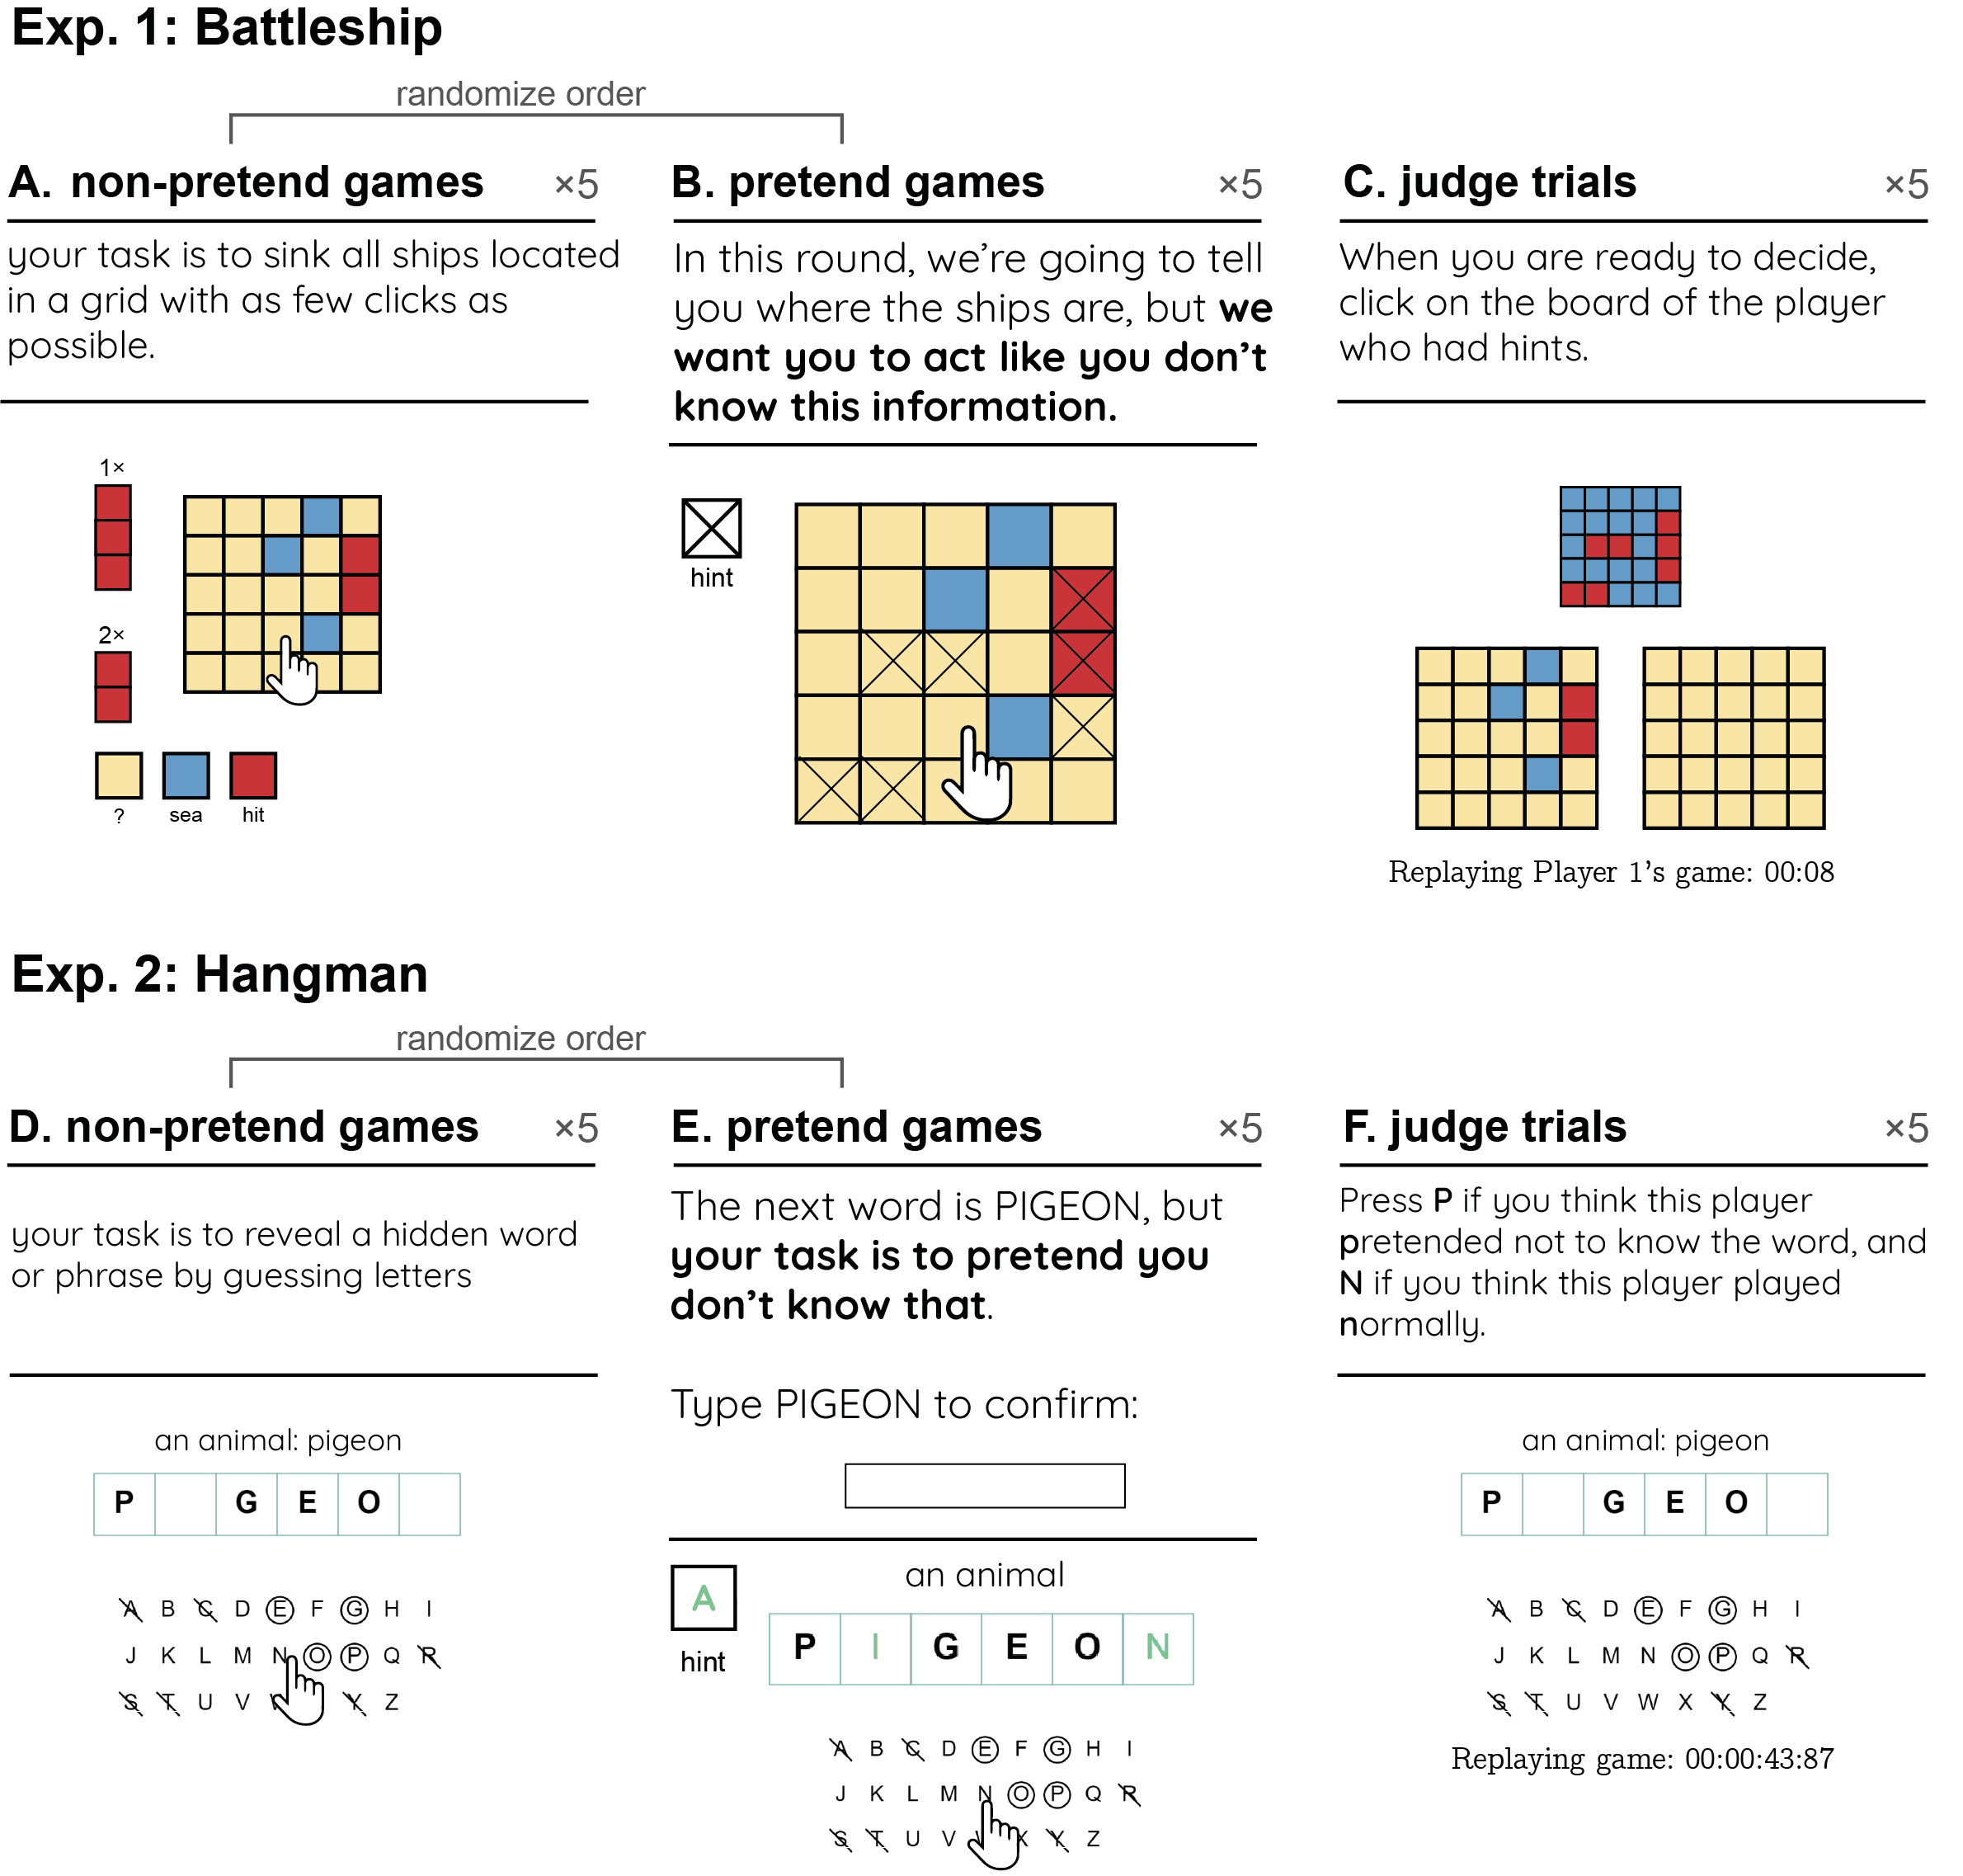 Experimental Design in Exp. 1 (upper panel) and 2 (lower panel). In non-pretend games, players revealed ships by guessing cells in a grid (A) or revealed a word by guessing letters (D). In pretend games, we marked ship locations with a cross (B) and revealed the target word from the start (E), but asked players to play as if they didn’t have this information. Lastly, players watched replays of the games of previous players and guessed which were pretend games (C and F).